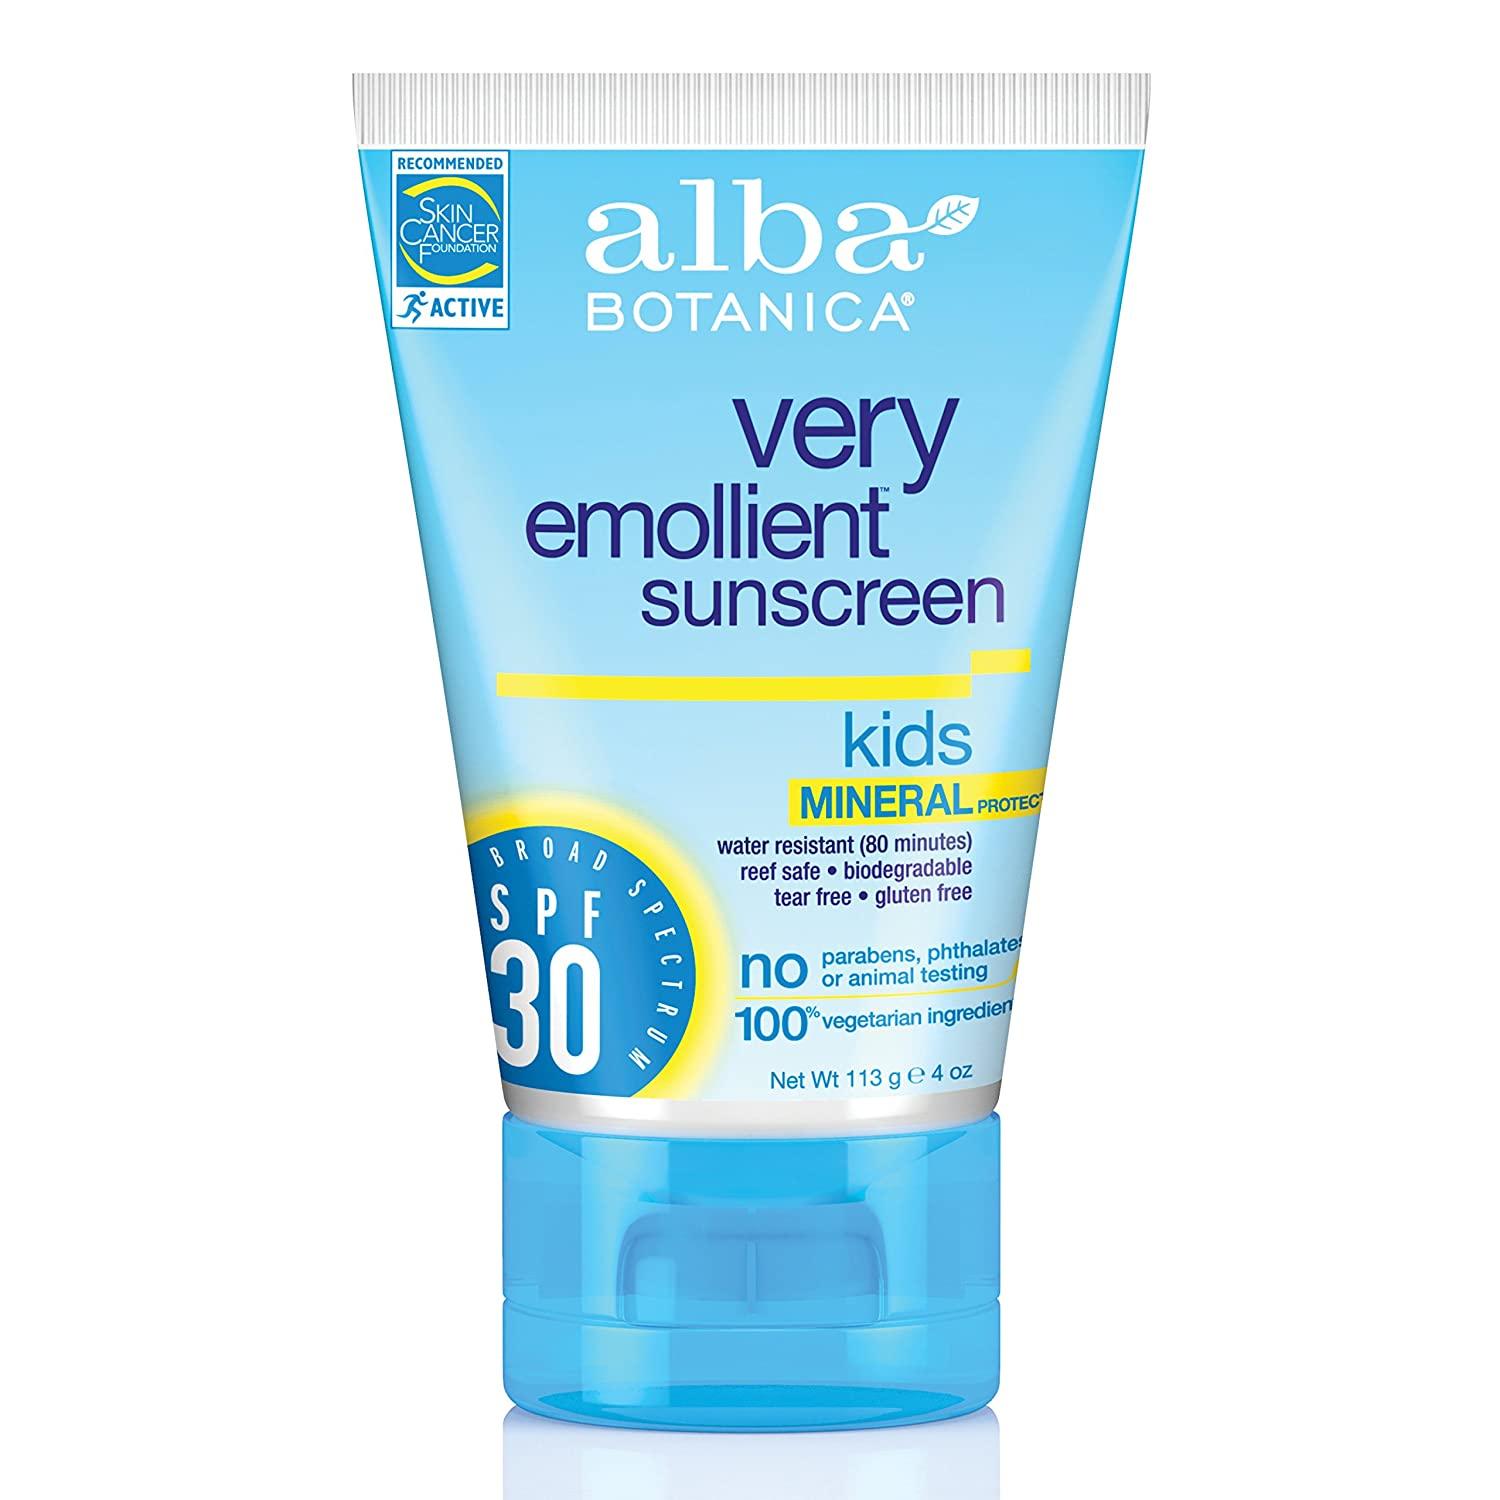 Very Emollient Sunscreen Mineral Protection, Kids SPF 30